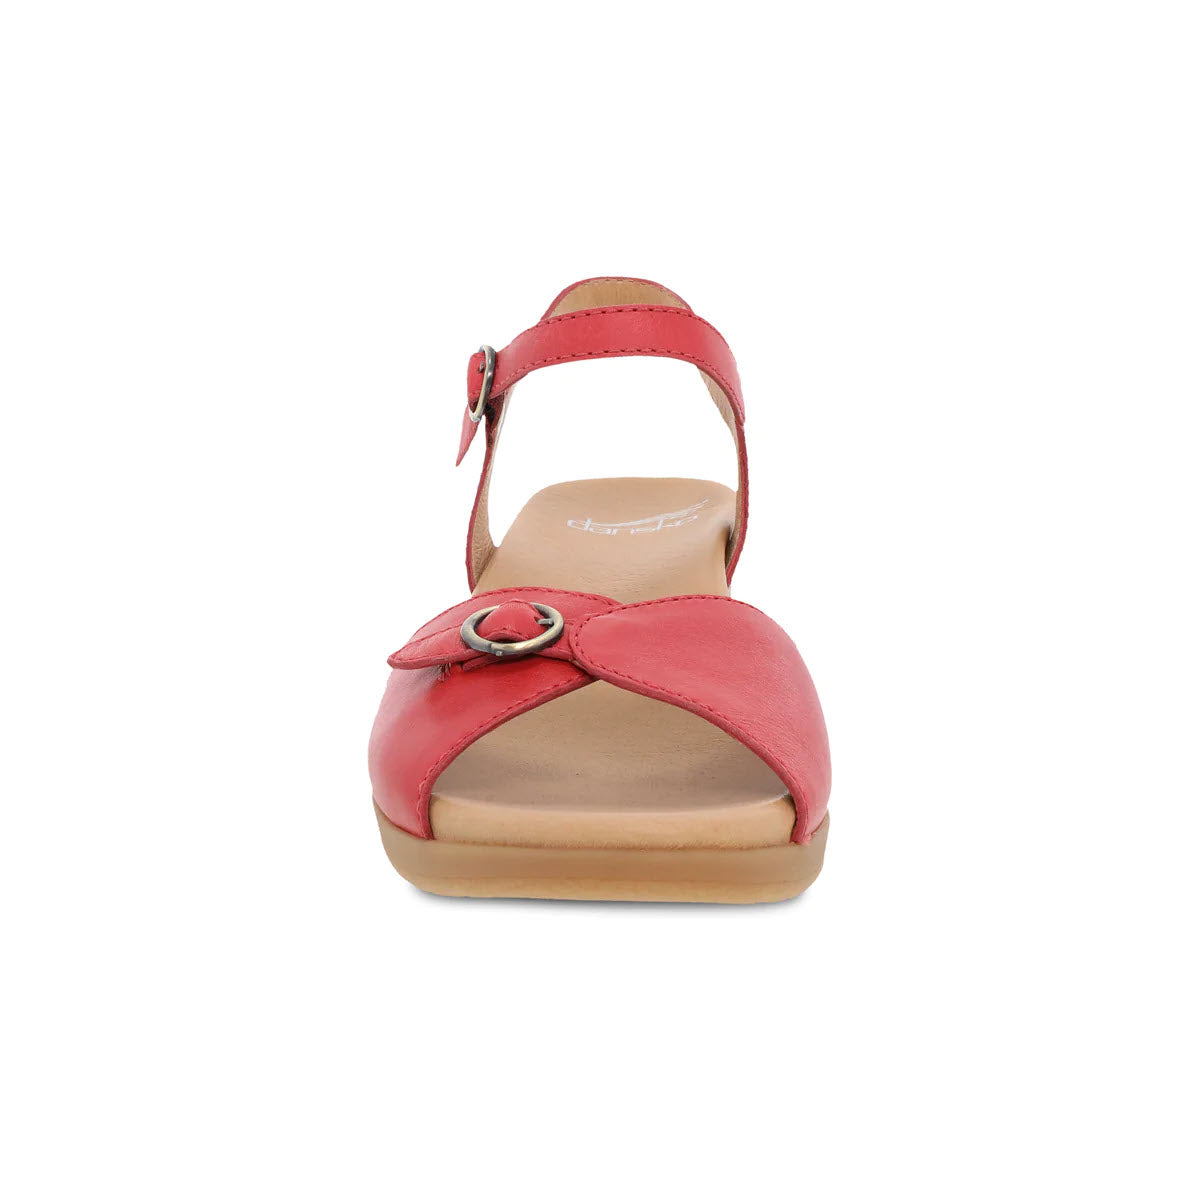 A single Dansko Tessie Poppy - Womens heeled sandal with an ankle strap and a circular buckle on the front, displayed against a white background.